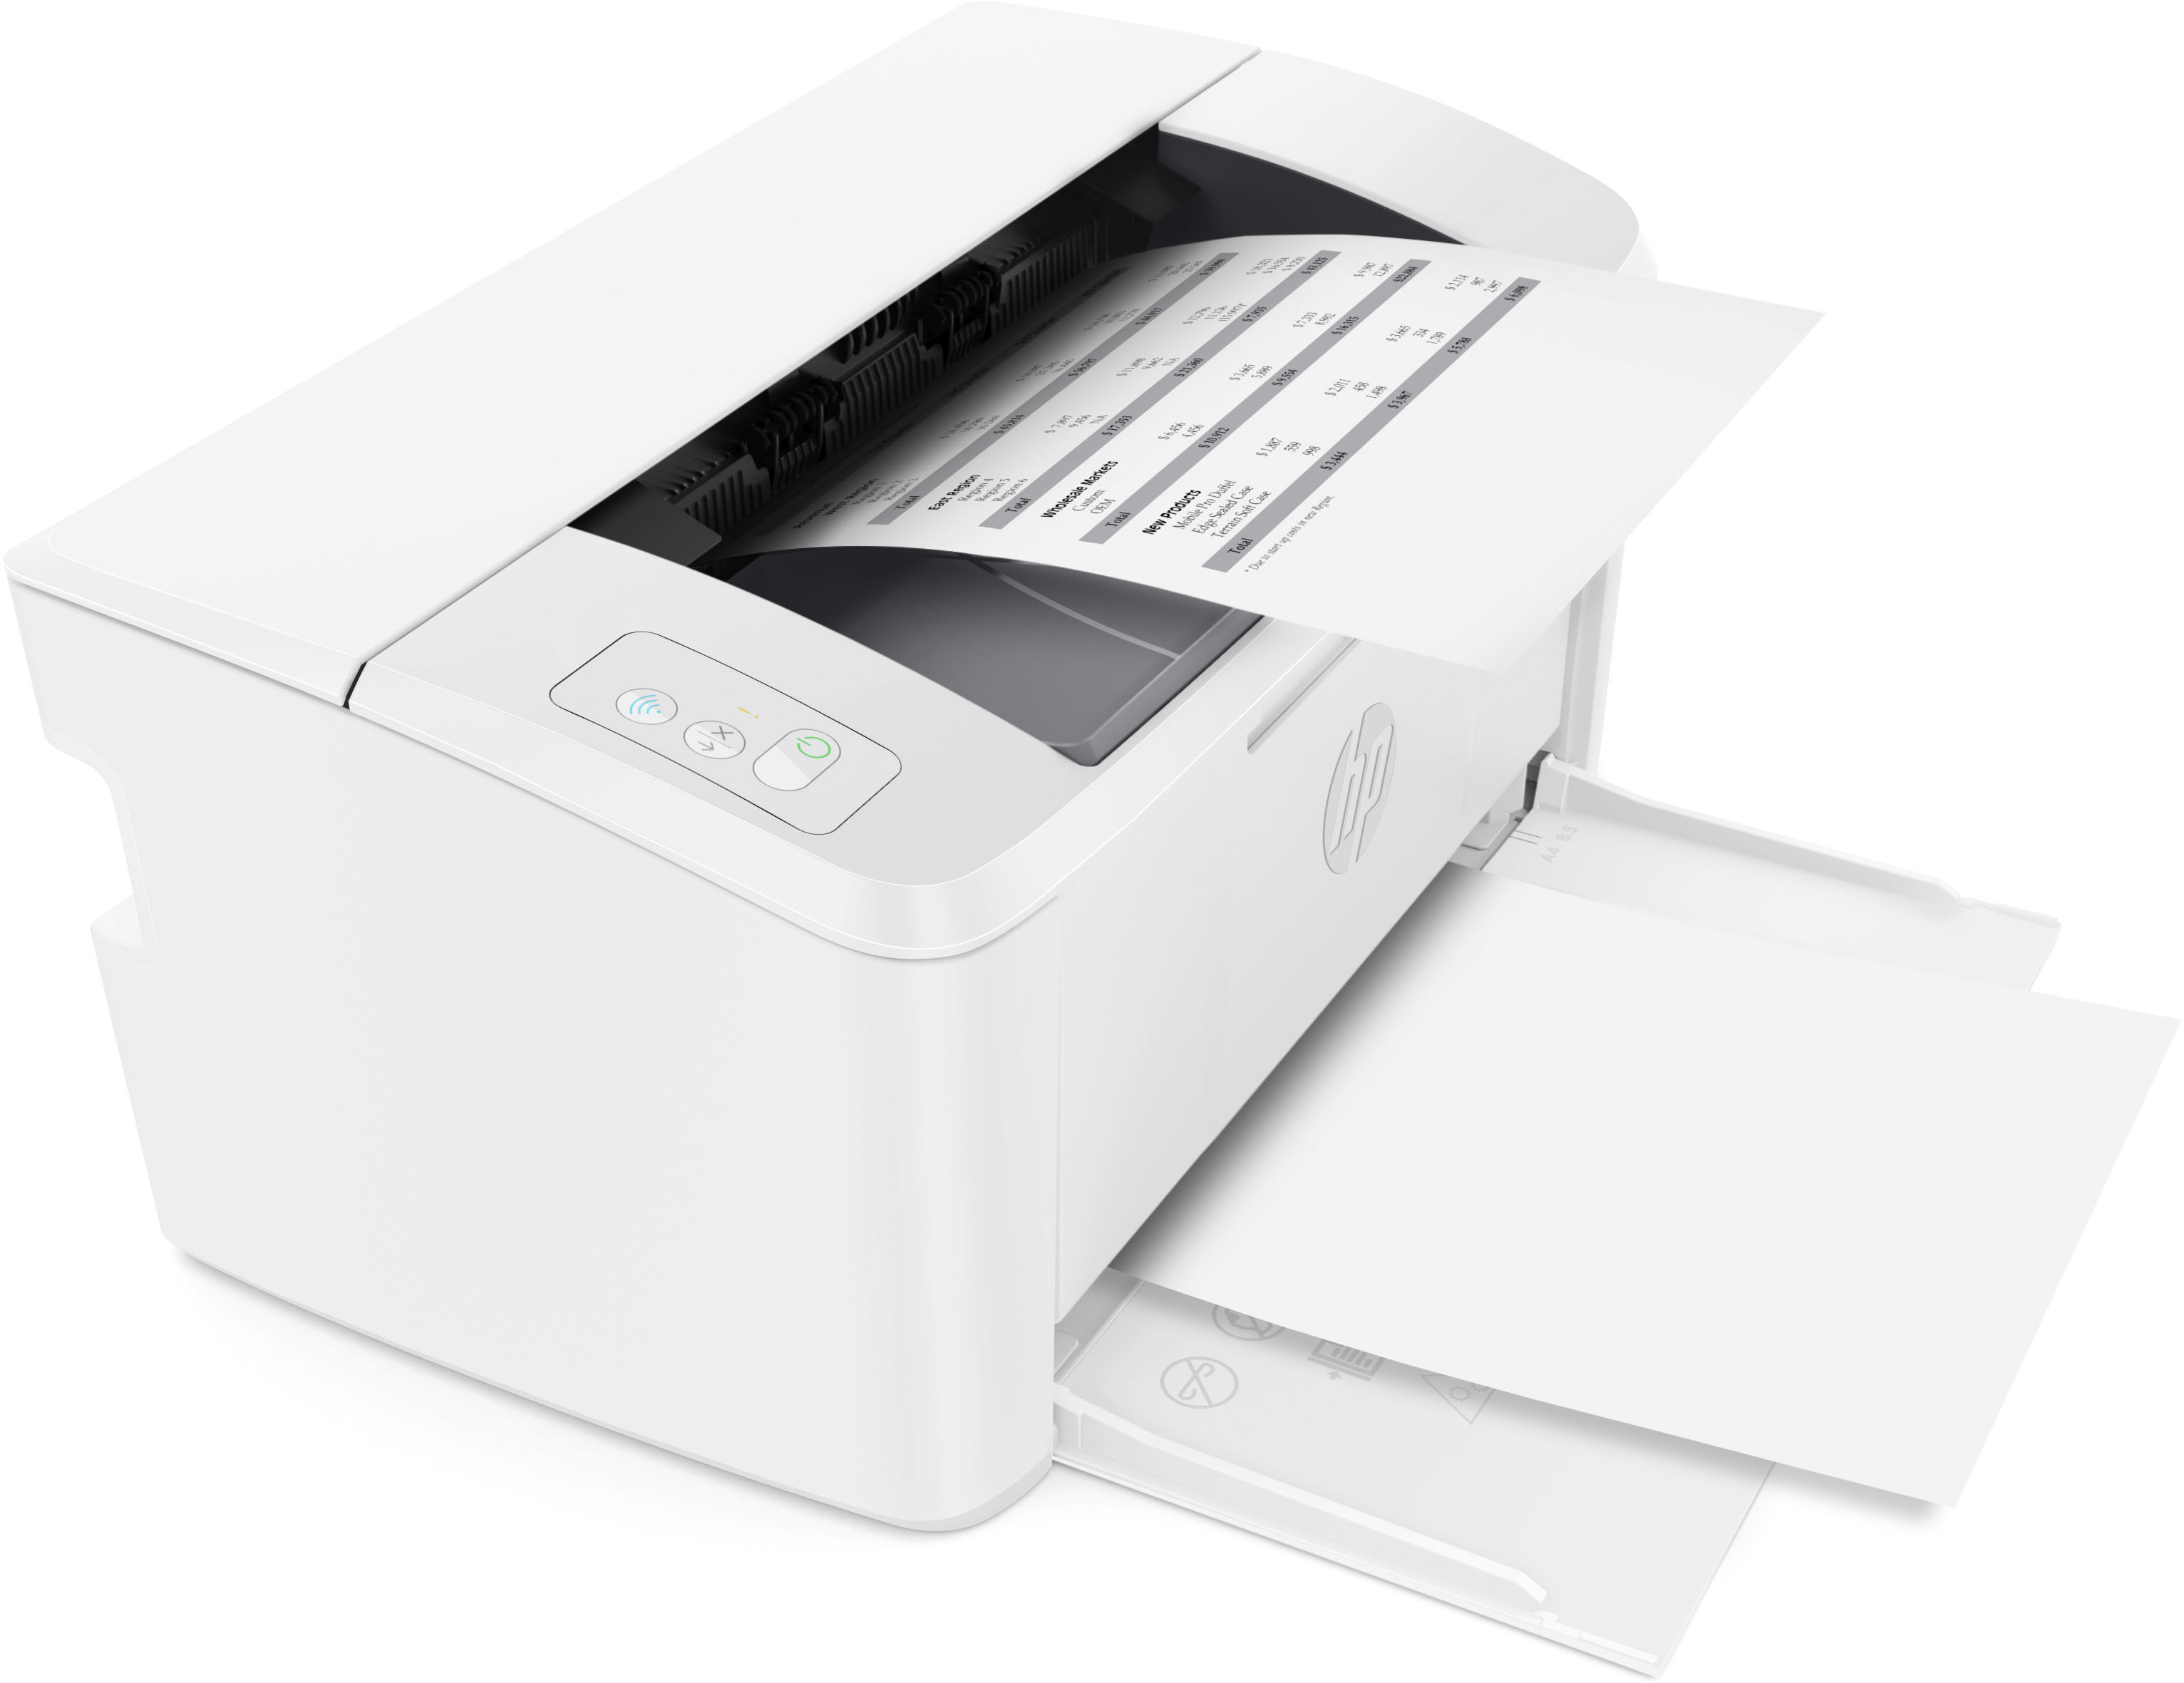 LaserJet Laser Printer M110we 6 HP+ and months Best White Black with - of Ink Buy with included HP Wireless White Instant LaserJet M110we